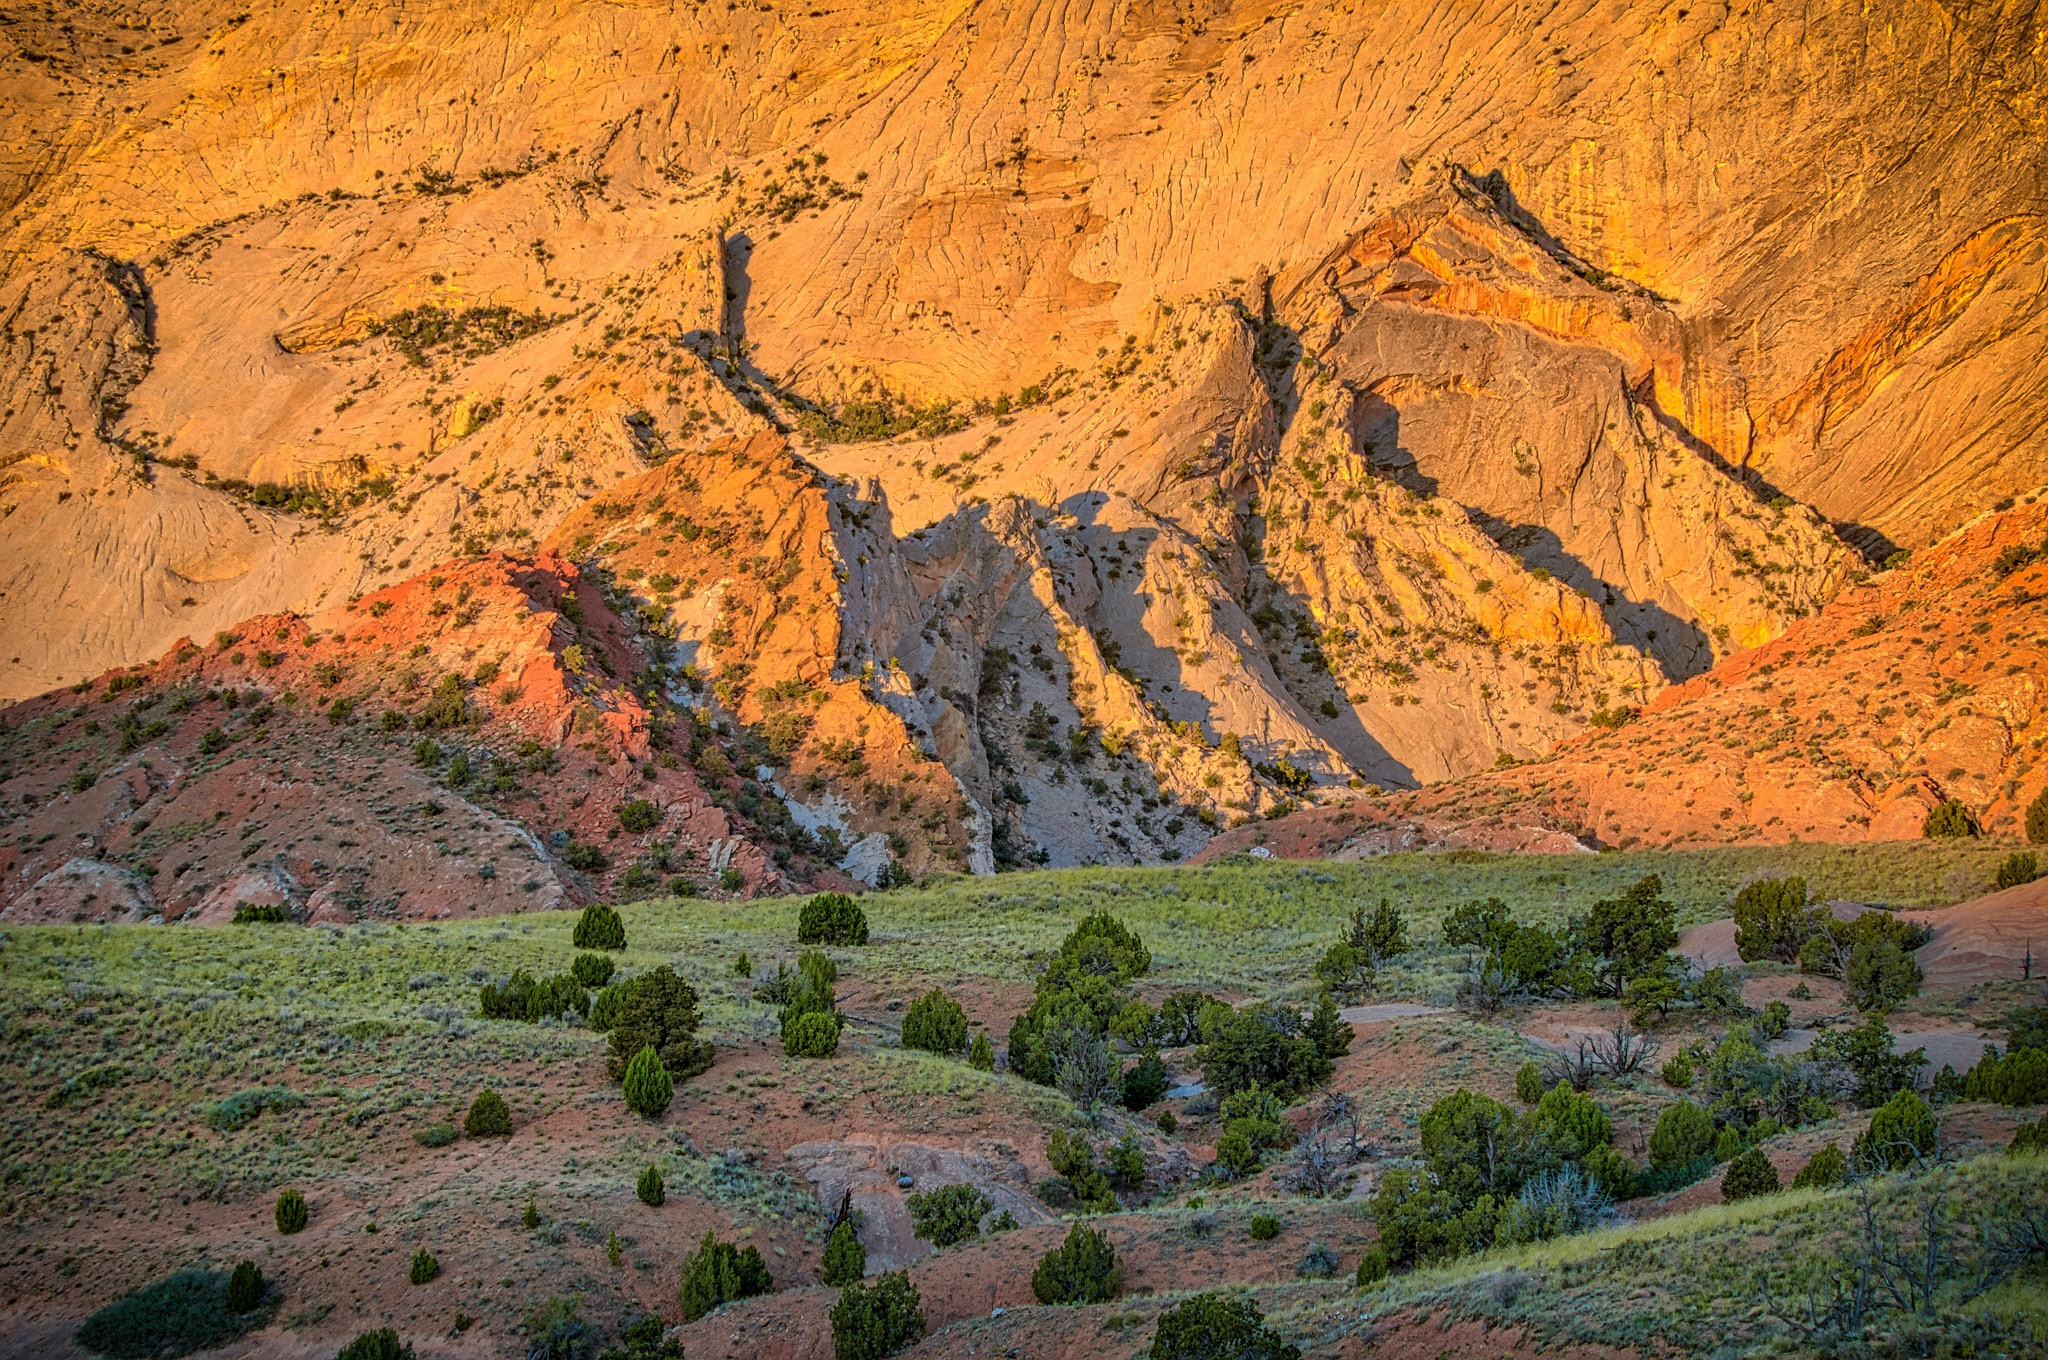 This is a view of the western side of the Waterpocket Fold, taken from the Notom-Bullfrog Road in Capitol Reef National Park near Torrey, Utah.